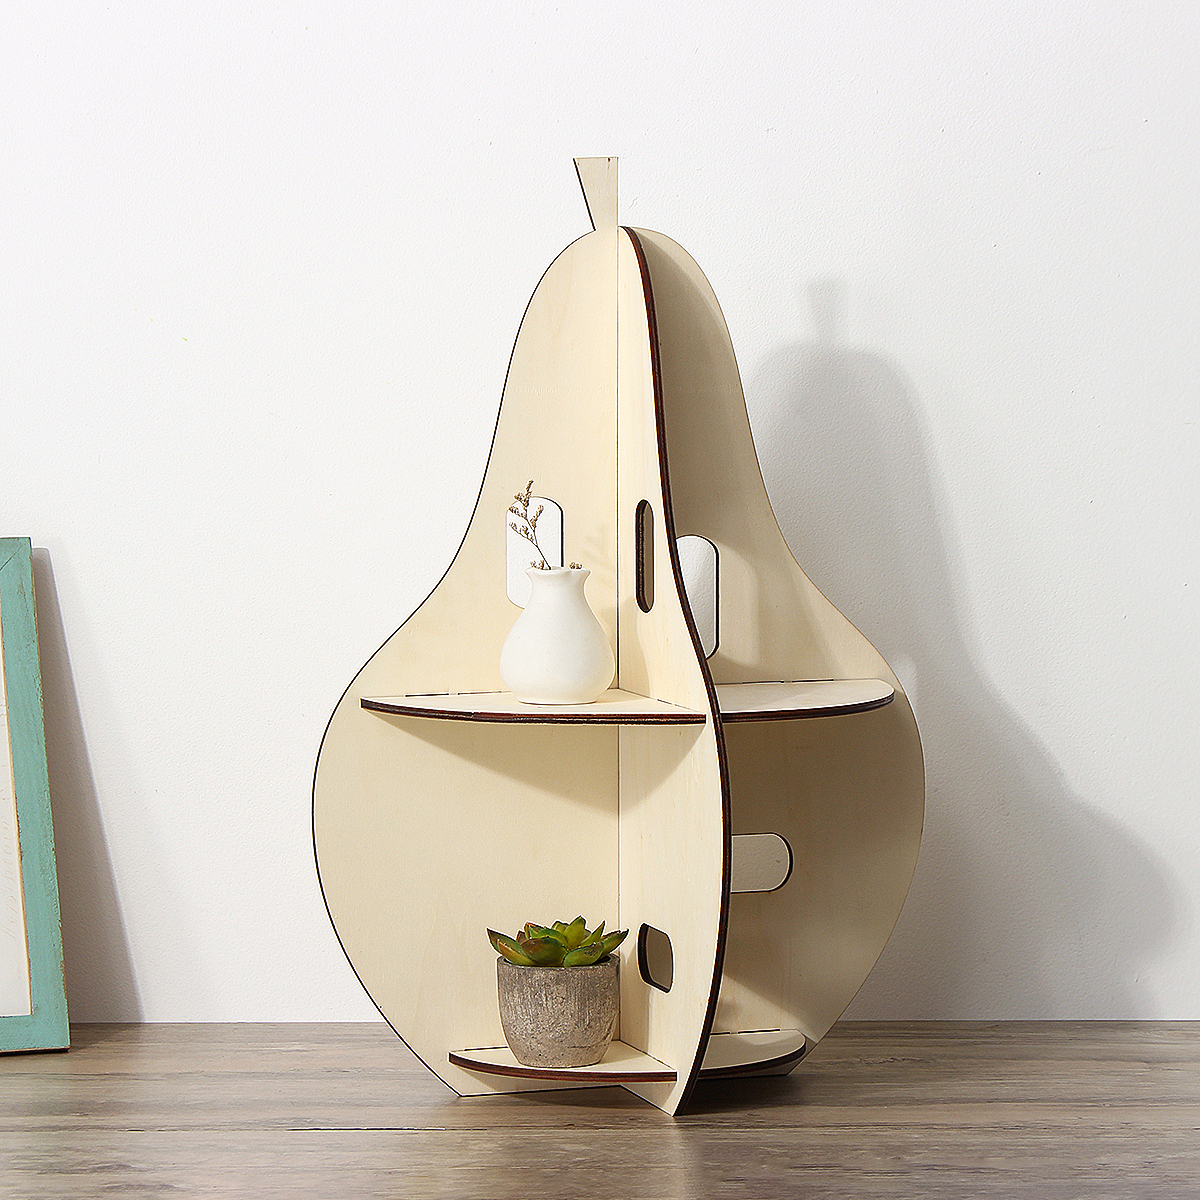 Wooden-Rack-Pear-shaped-Racks-Display-Craft-Shelf-Home-Decorations-Nordic-Style-Gift-1596581-5